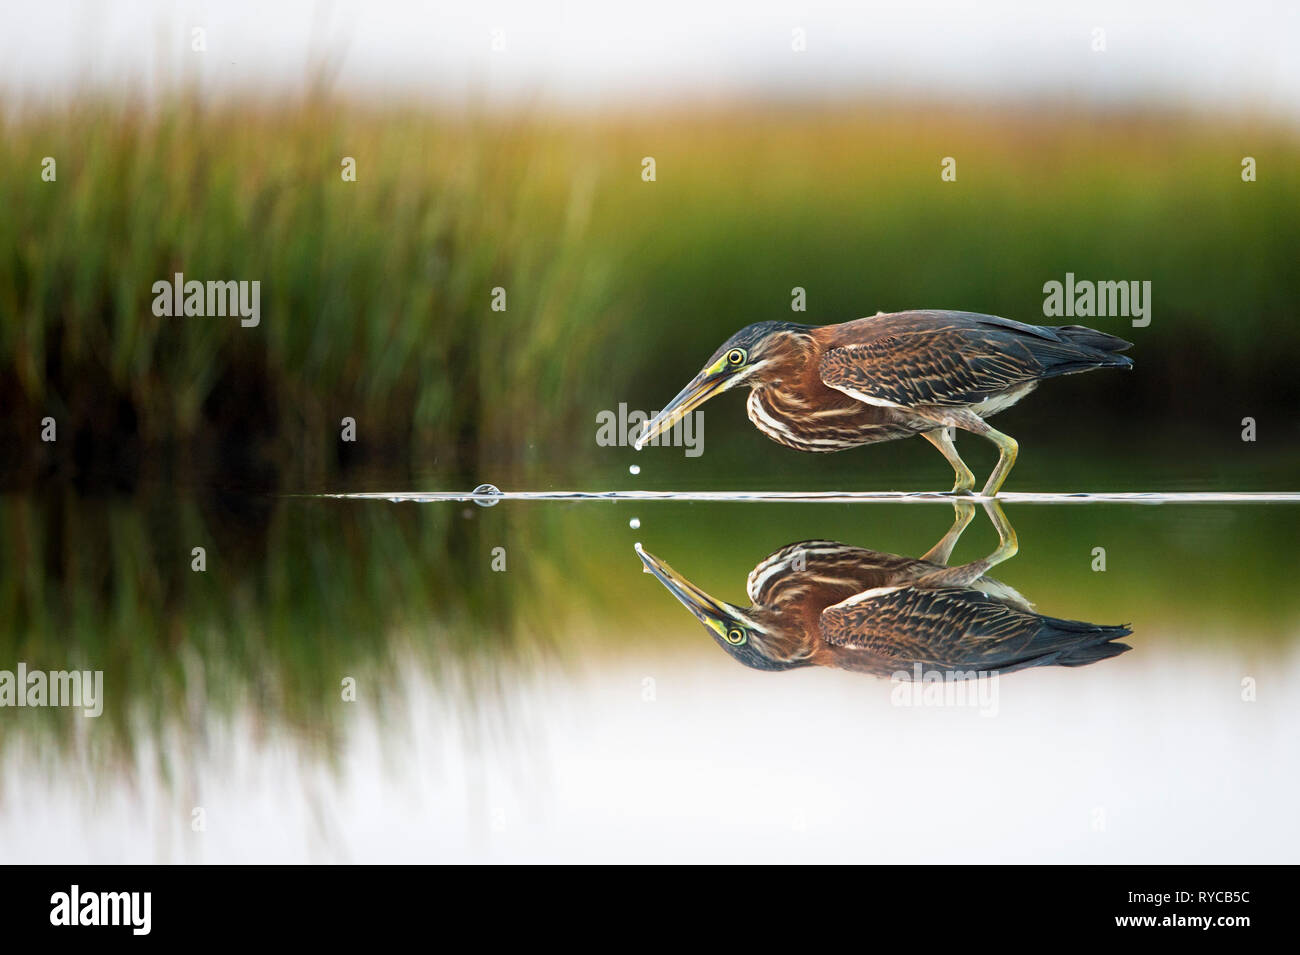 A Green Heron catches a small fish in the very calm and shallow water of a marsh with a near perfect mirror reflection. Stock Photo